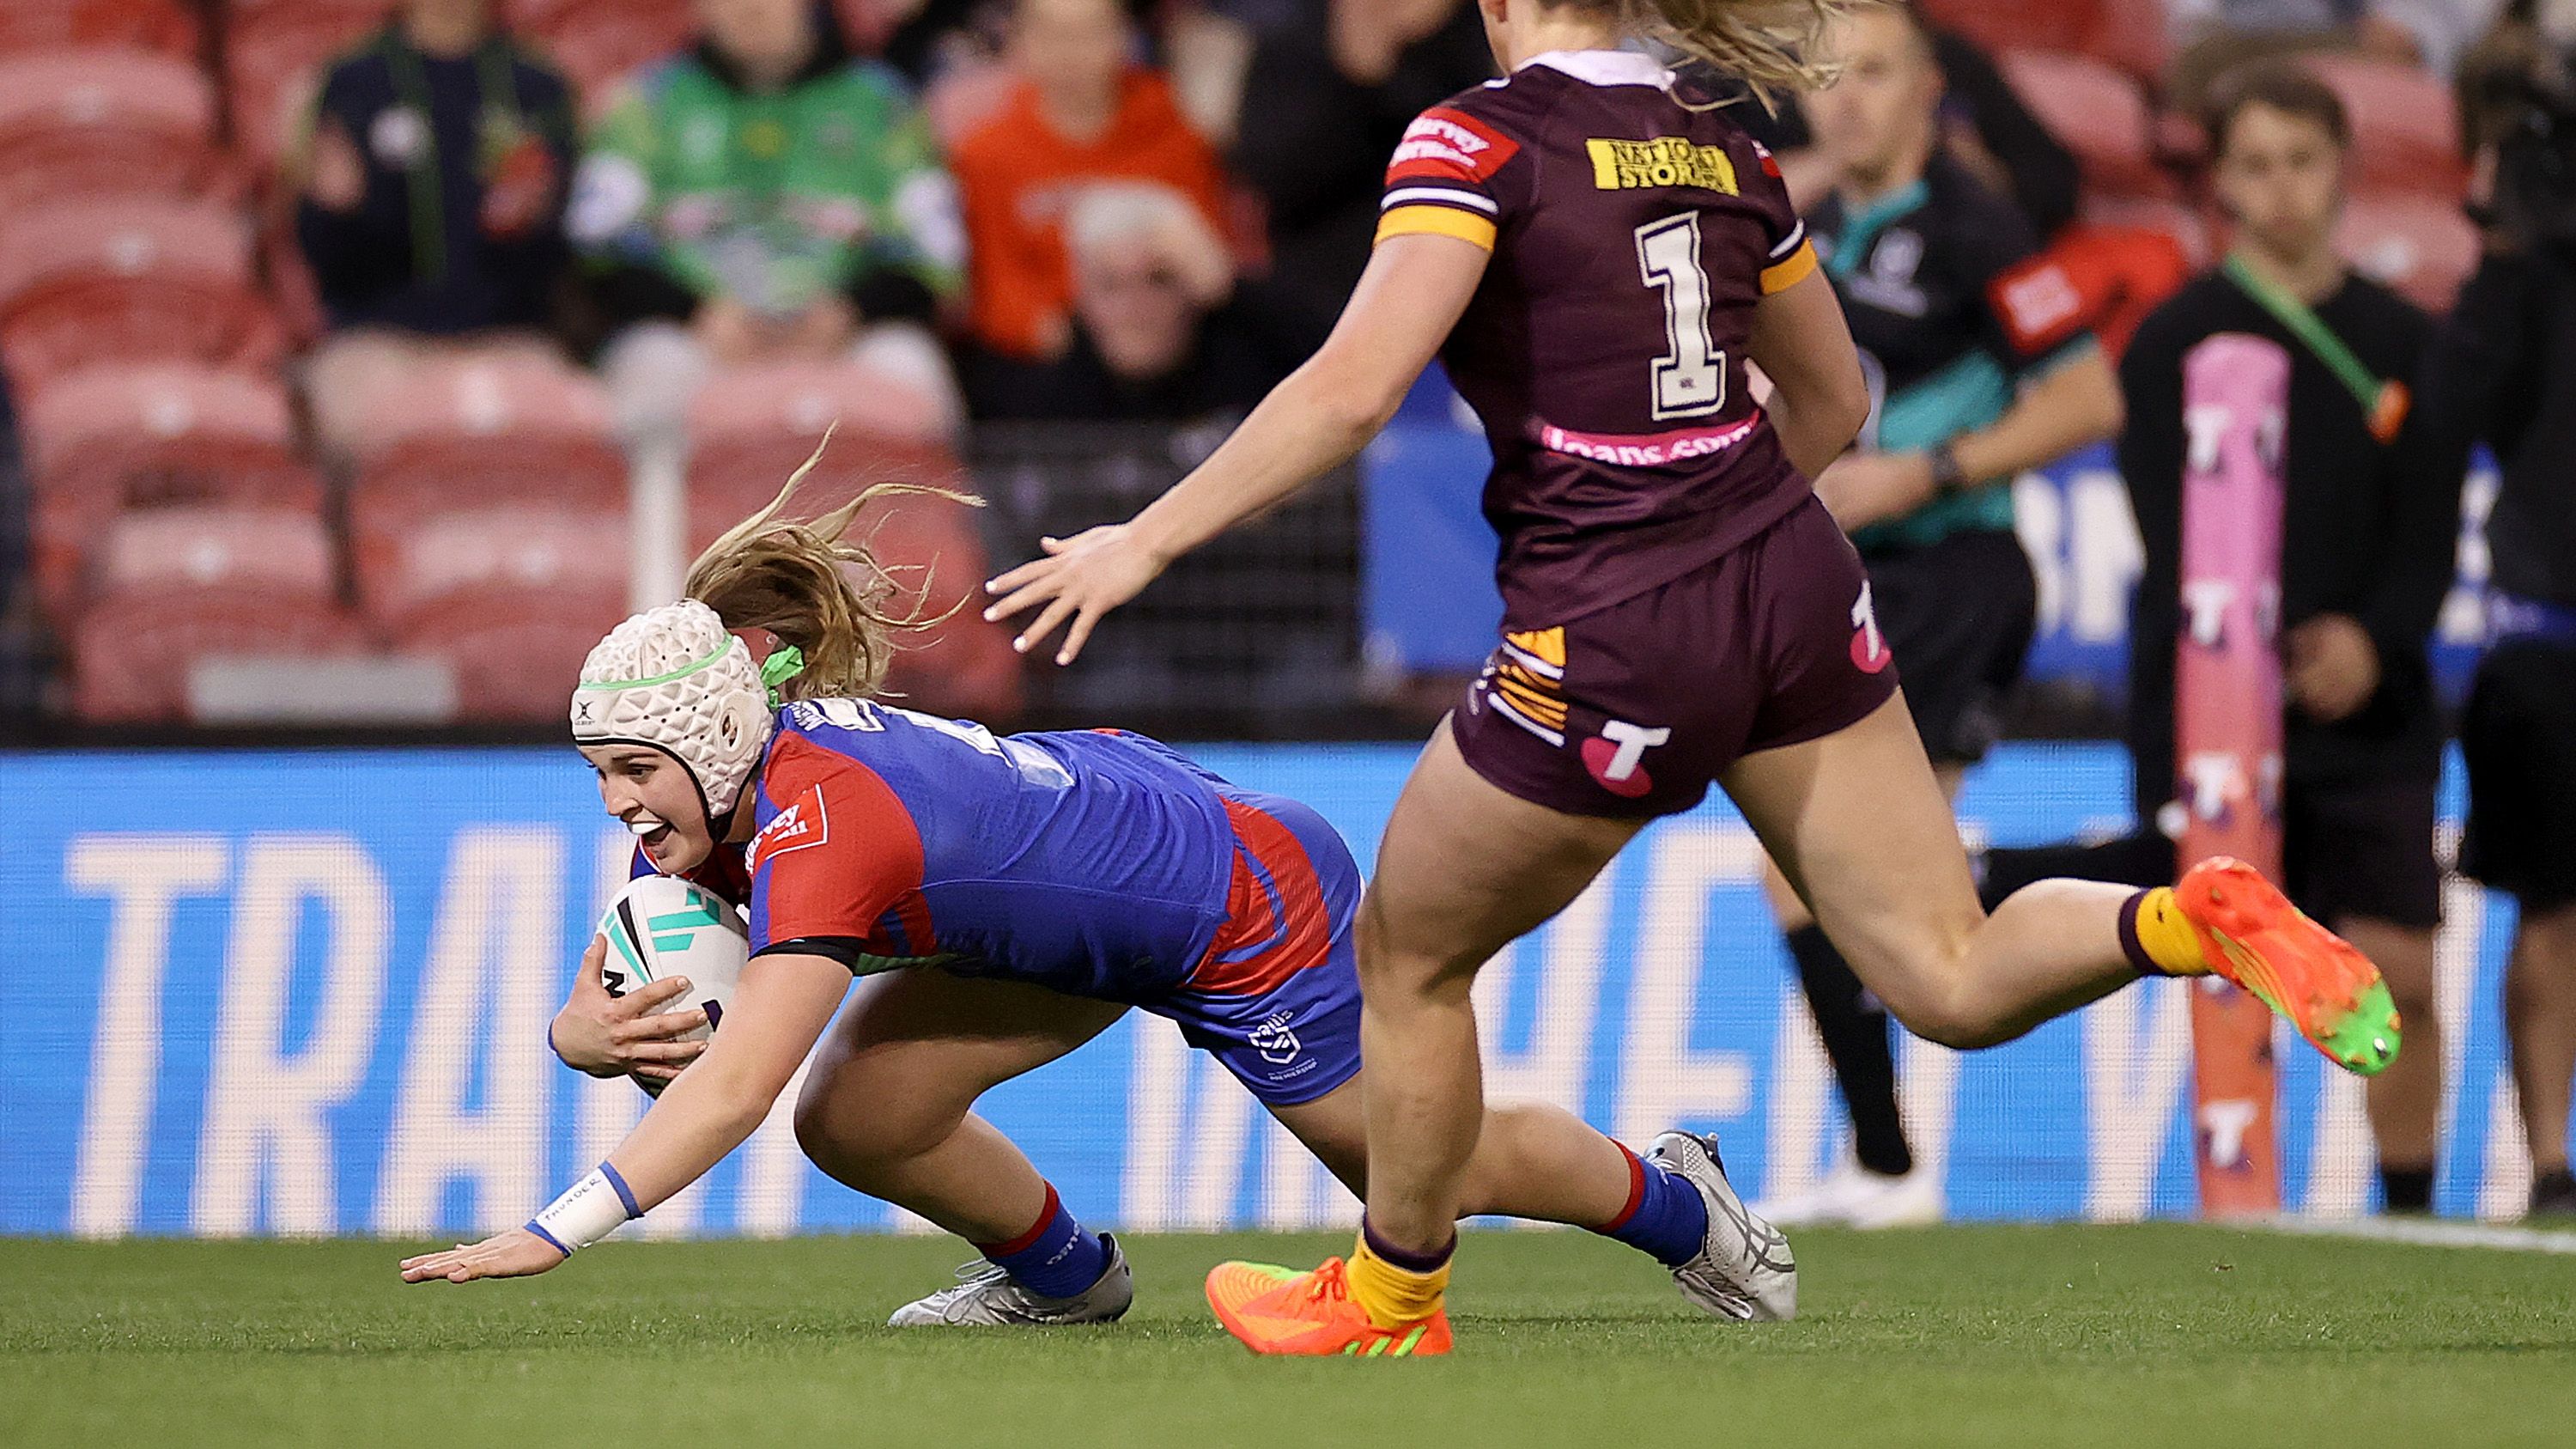 Jesse Southwell of the Knights scores a try during the round one NRLW match between Newcastle Knights and Brisbane Broncos at McDonald Jones Stadium, on August 21, 2022, in Newcastle, Australia. (Photo by Cameron Spencer/Getty Images)